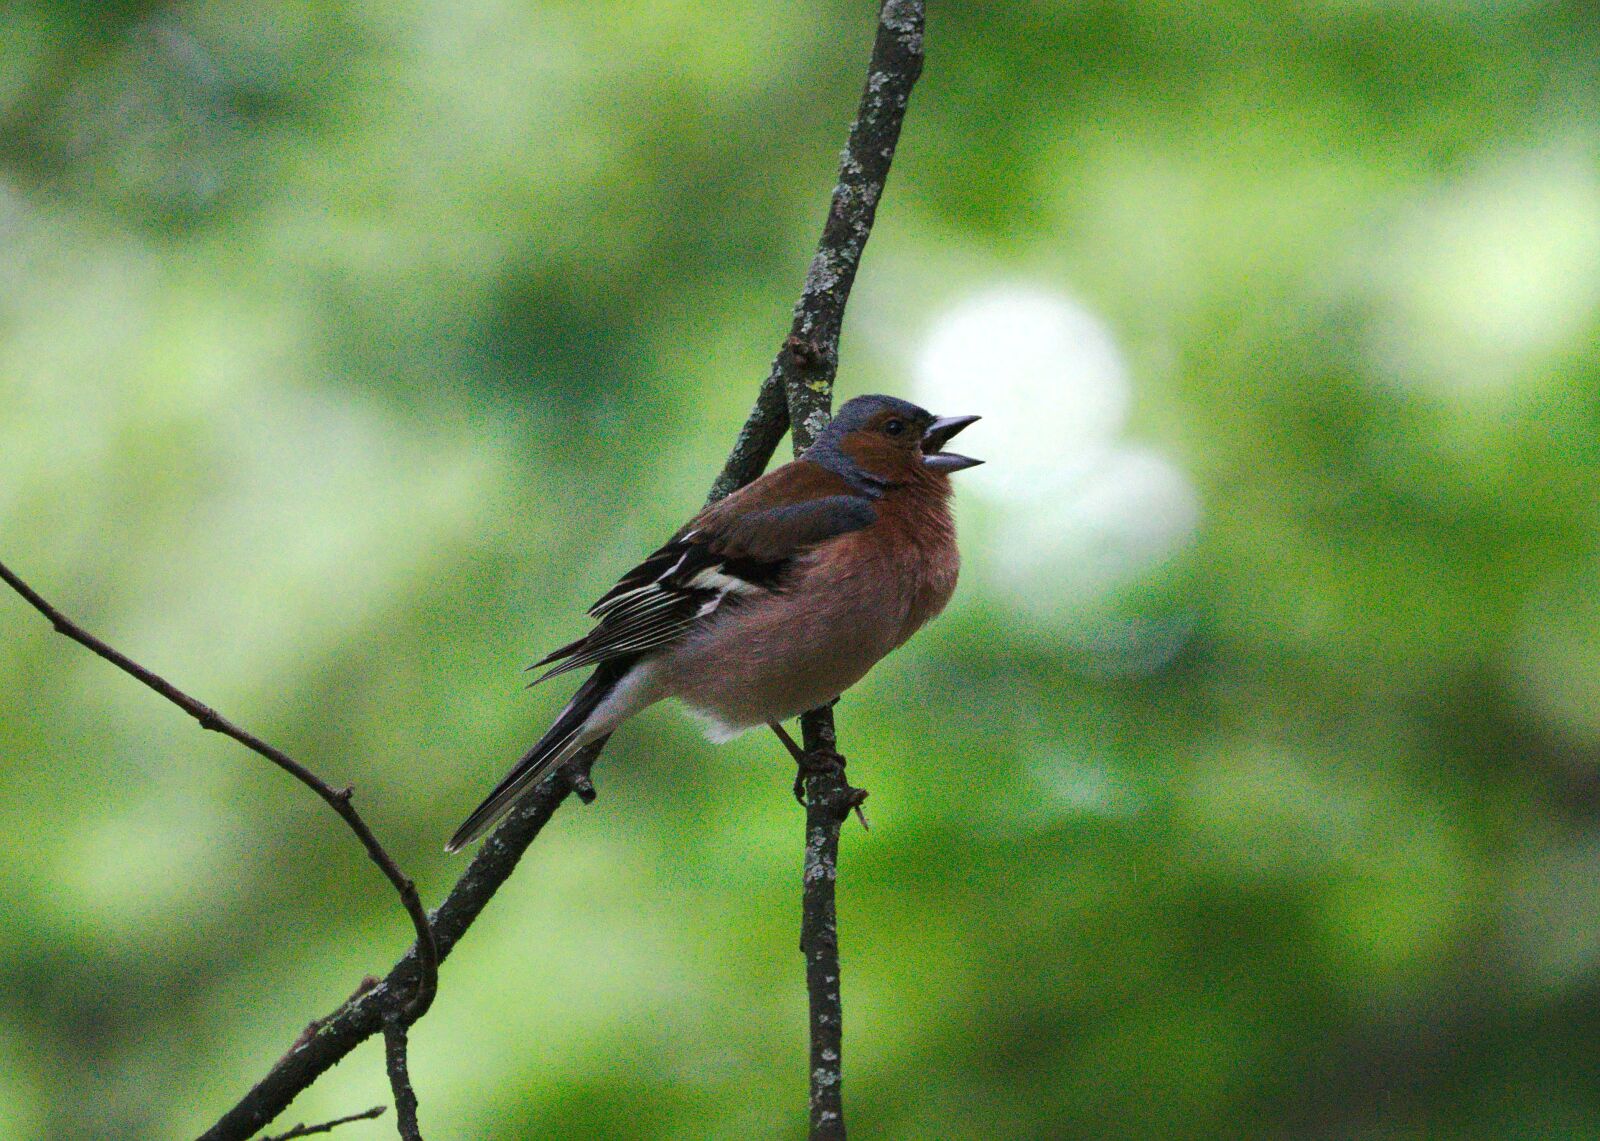 Sony a6000 + Sony FE 70-300mm F4.5-5.6 G OSS sample photo. Chaffinch, branch, twitter photography